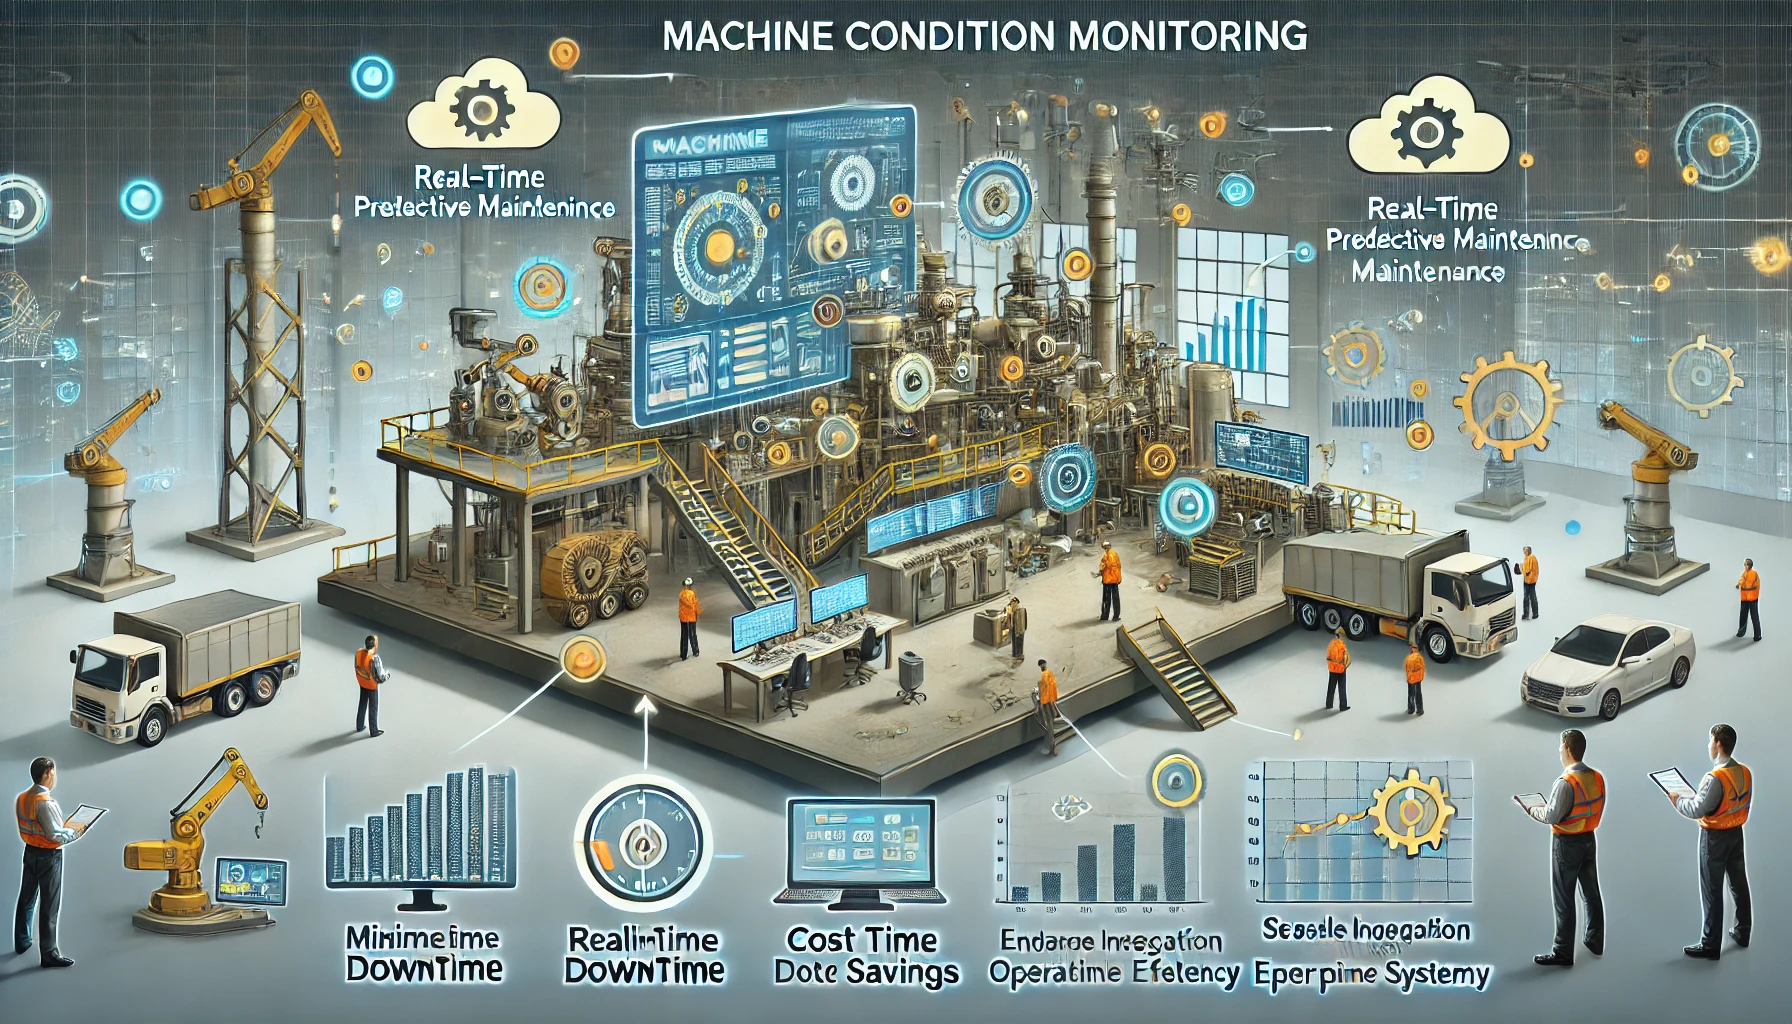 How Condition Monitoring Systems Facilitate Predictive Maintenance Planning